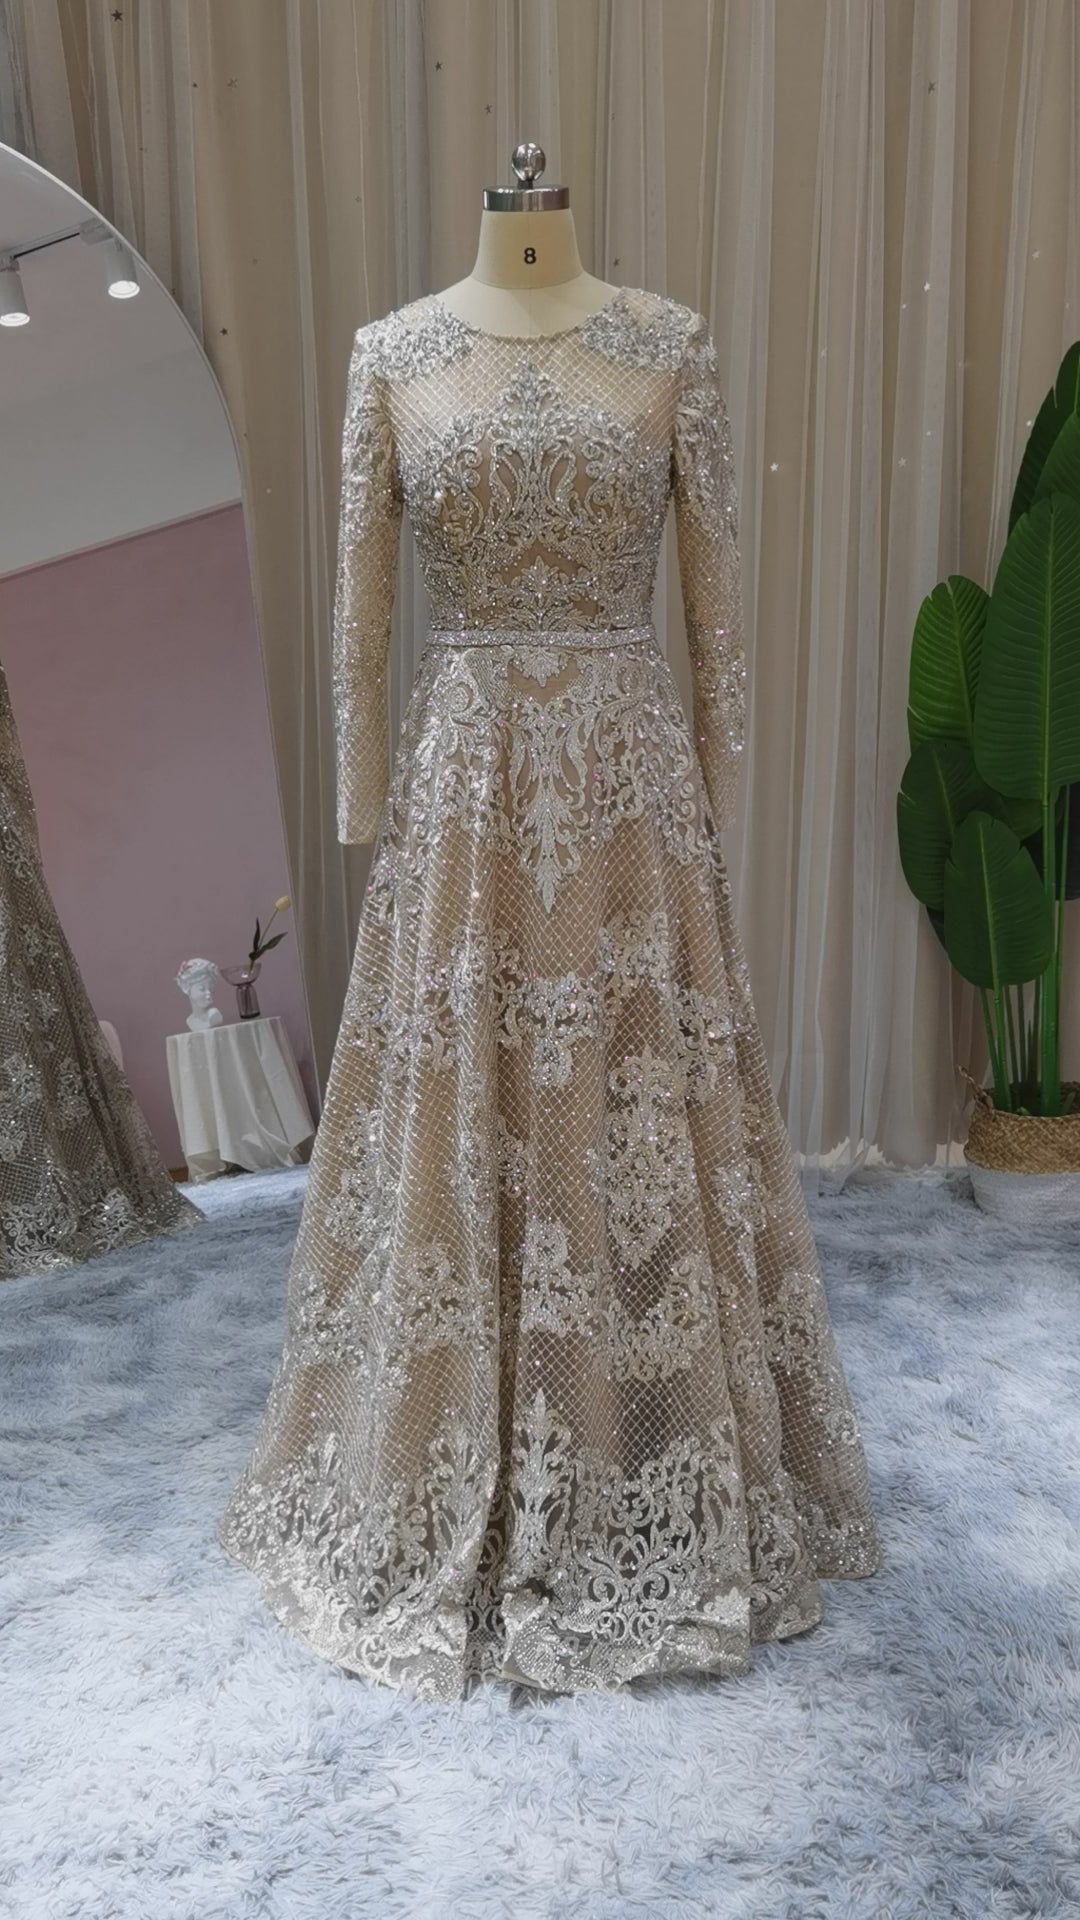 Dreamy Vow Luxury Dubai Champagne Lace Muslim Evening Dress Long Sleeve Plus Size Women Arabic Formal Party Dresses for Wedding Guest SS193